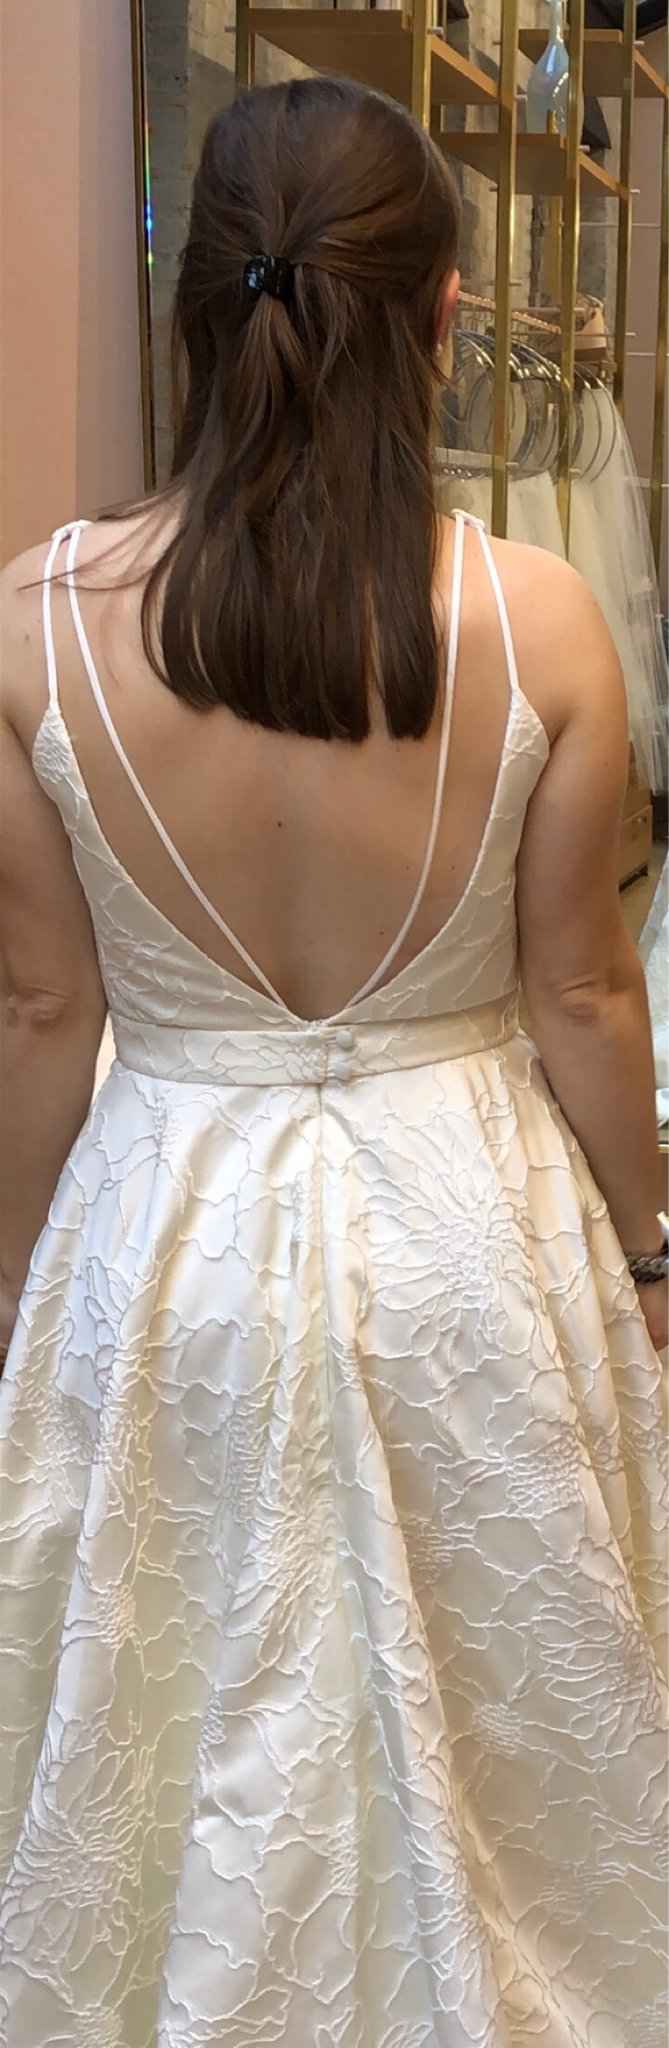 Bridal shop ordered my dress in too small a size - 1